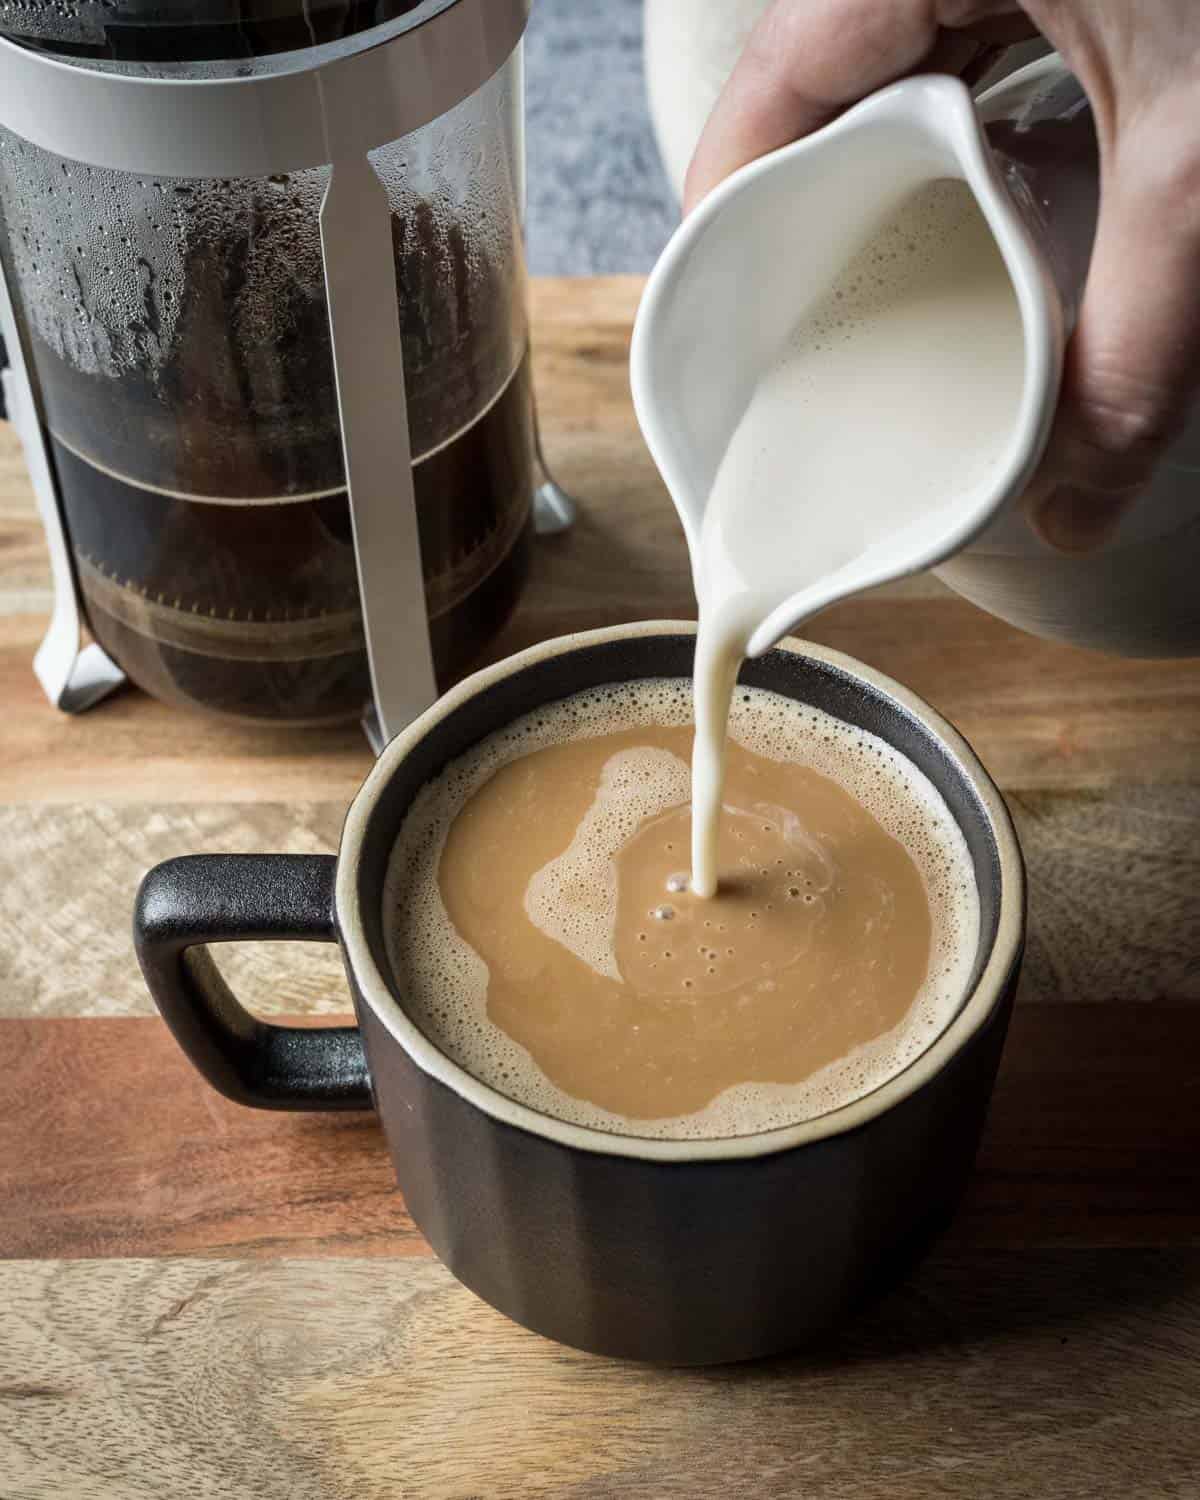 Pouring homemade oat milk into a cup of coffee.